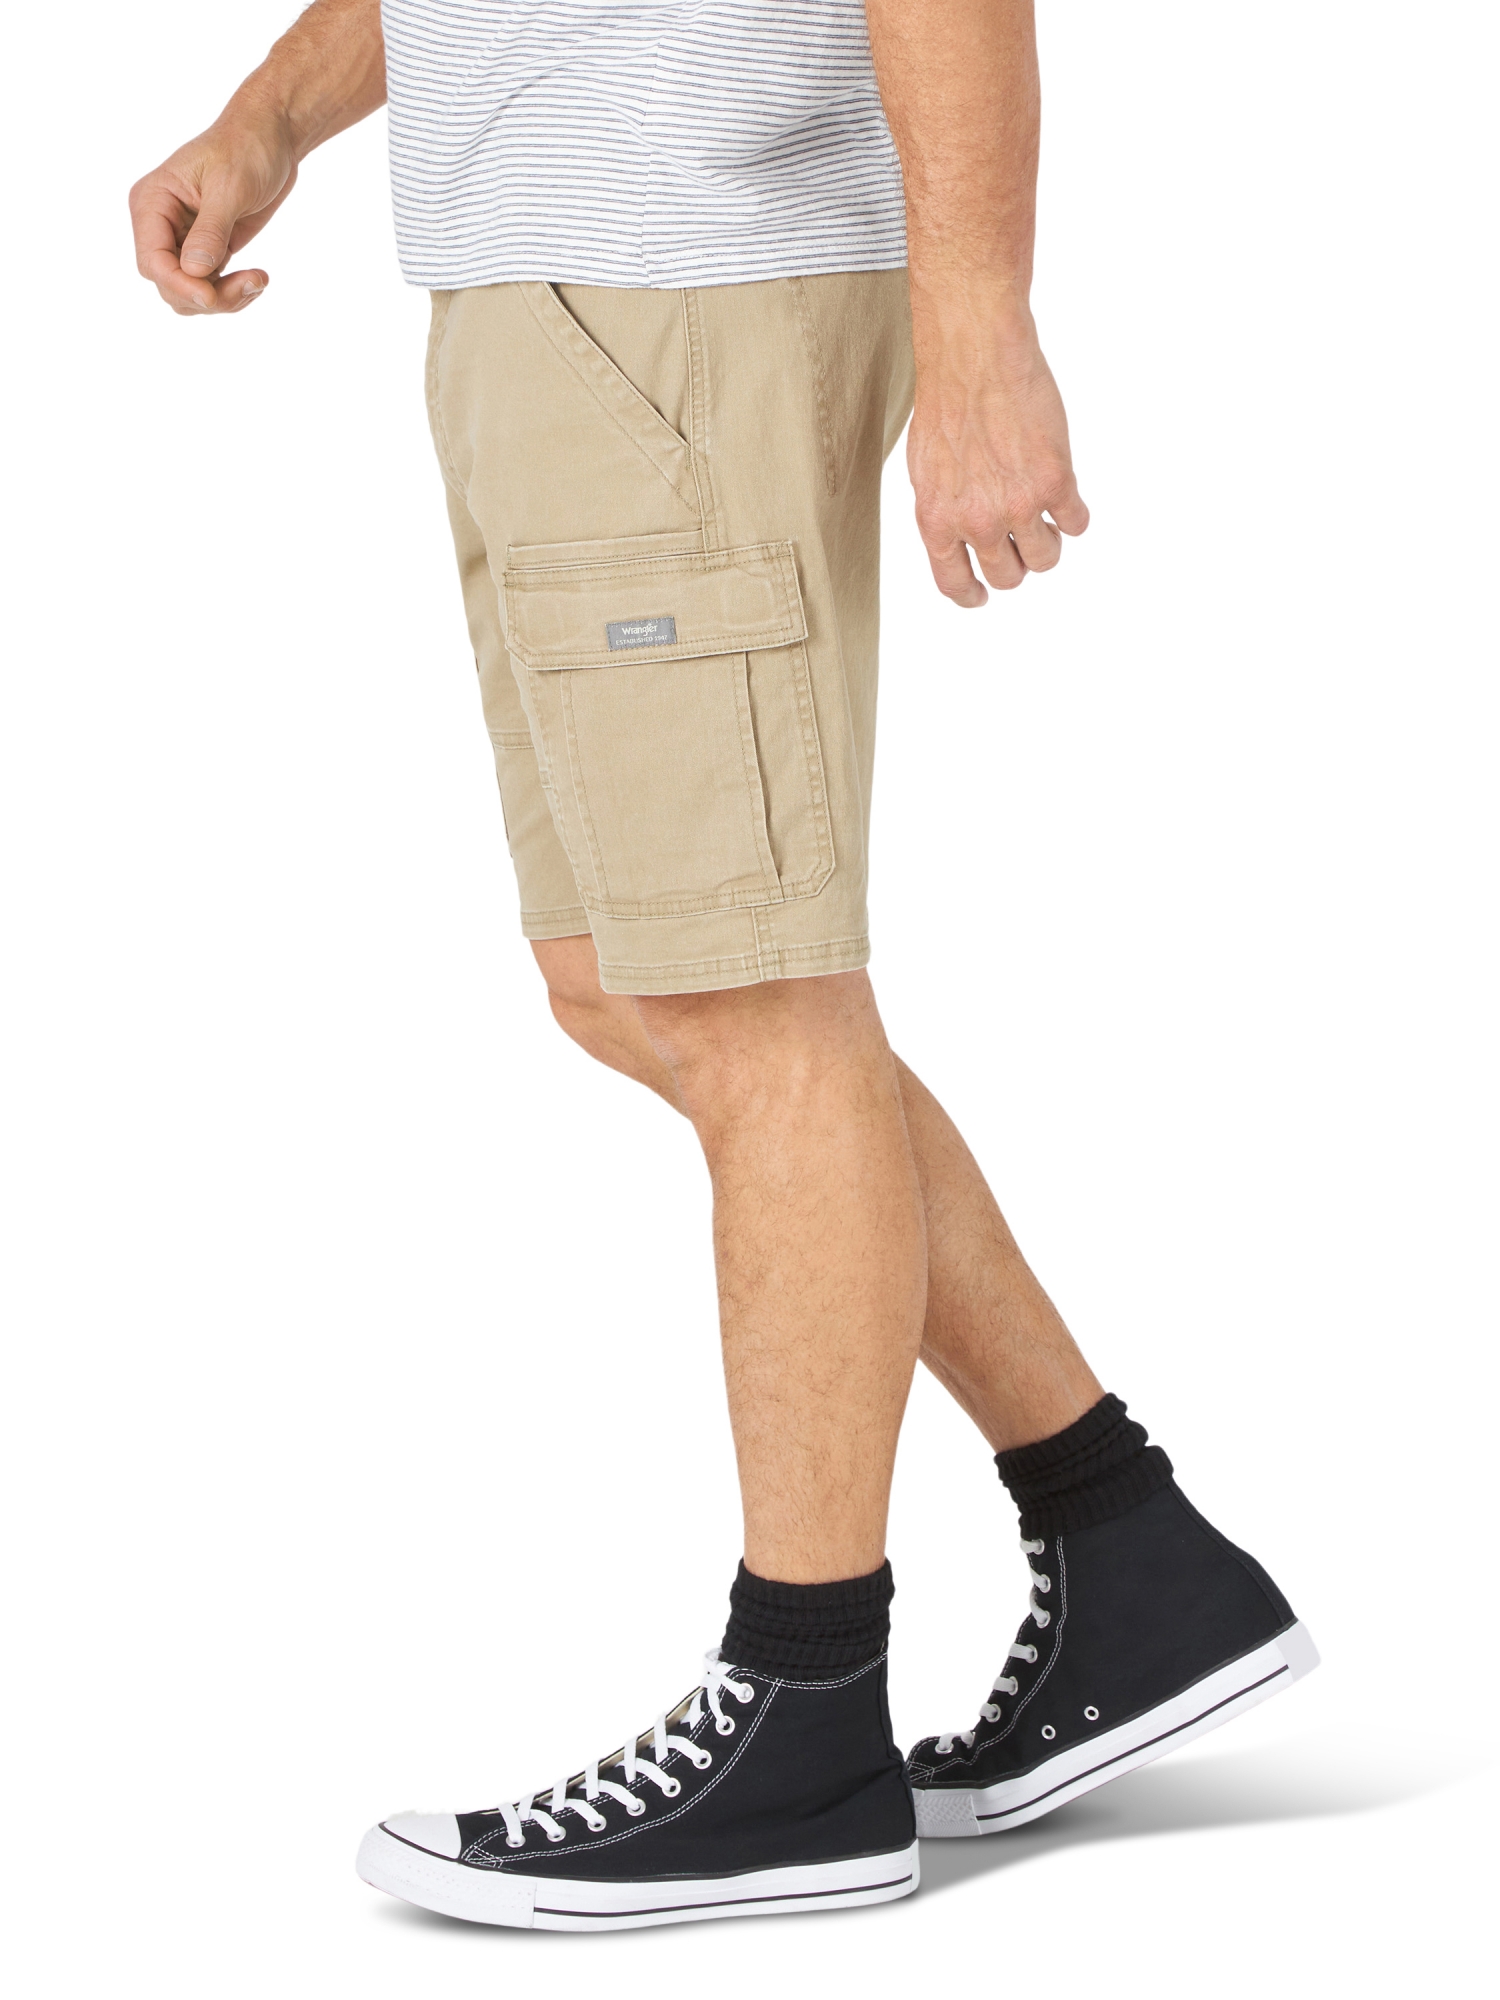 Wrangler Men's and Big Men's 10" Relaxed Fit Cargo Shorts With Stretch - image 3 of 8